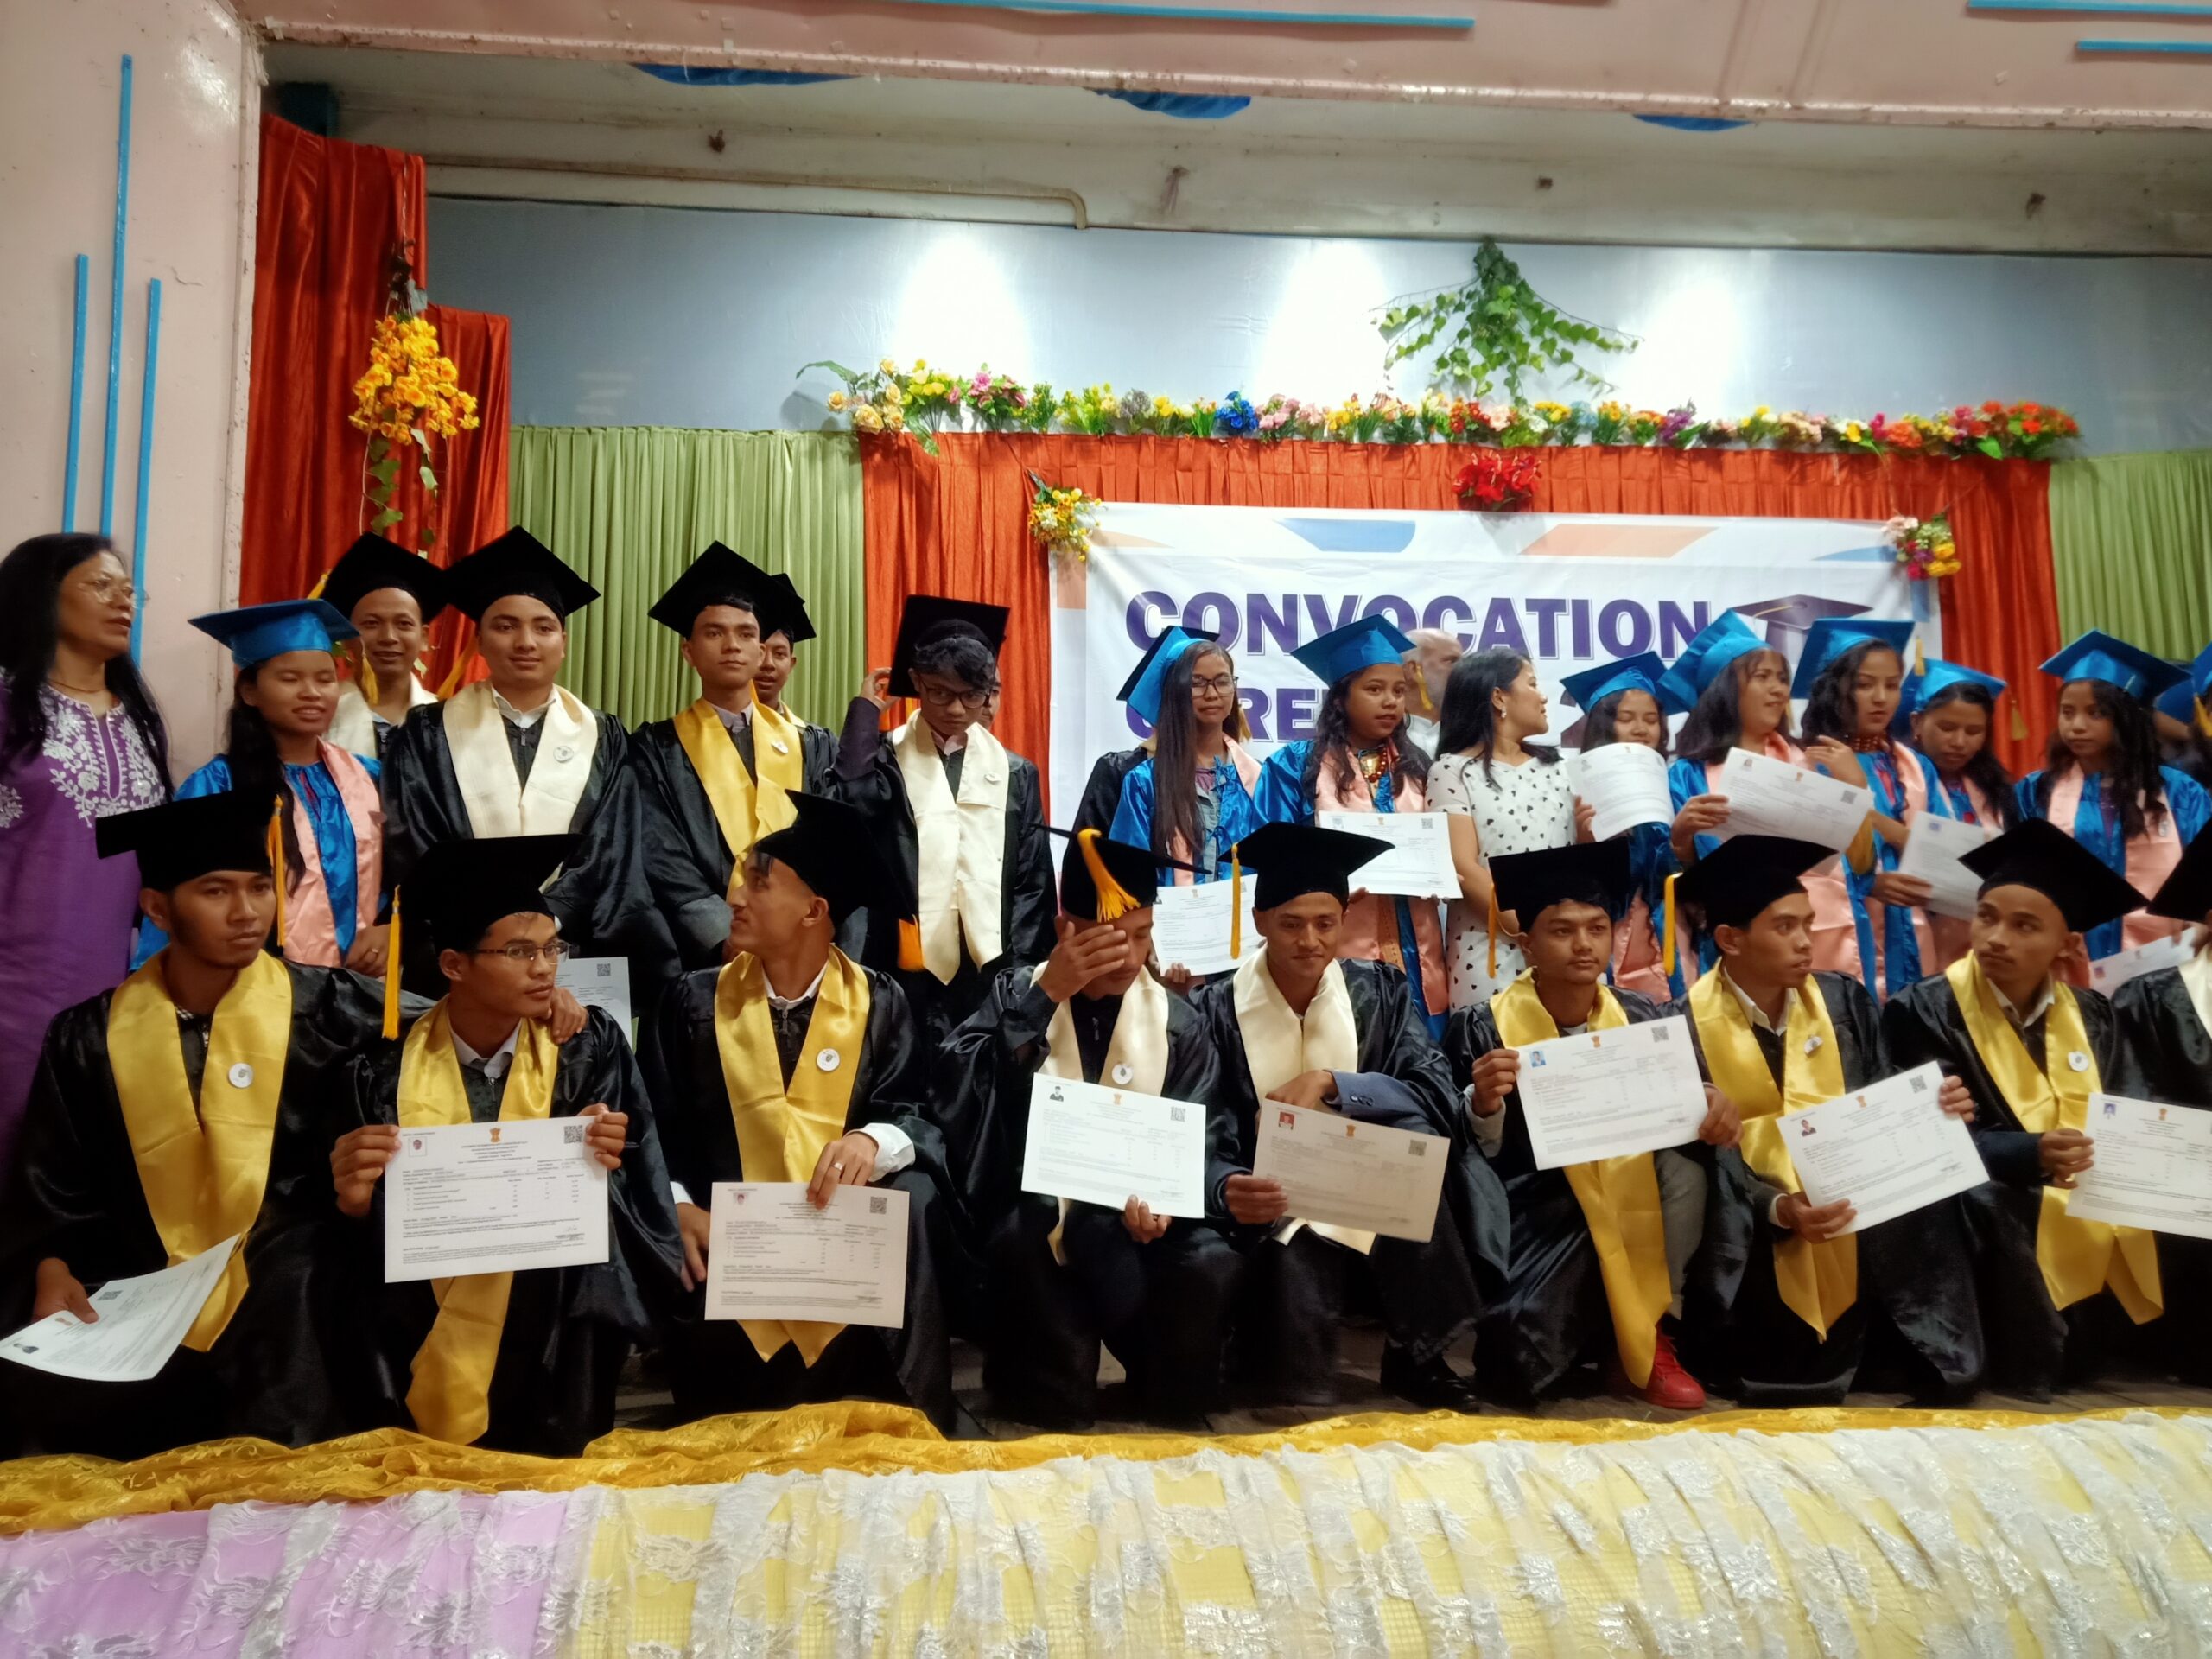 Don Bosco Industrial Training Institutes in India graduated 1,665 students